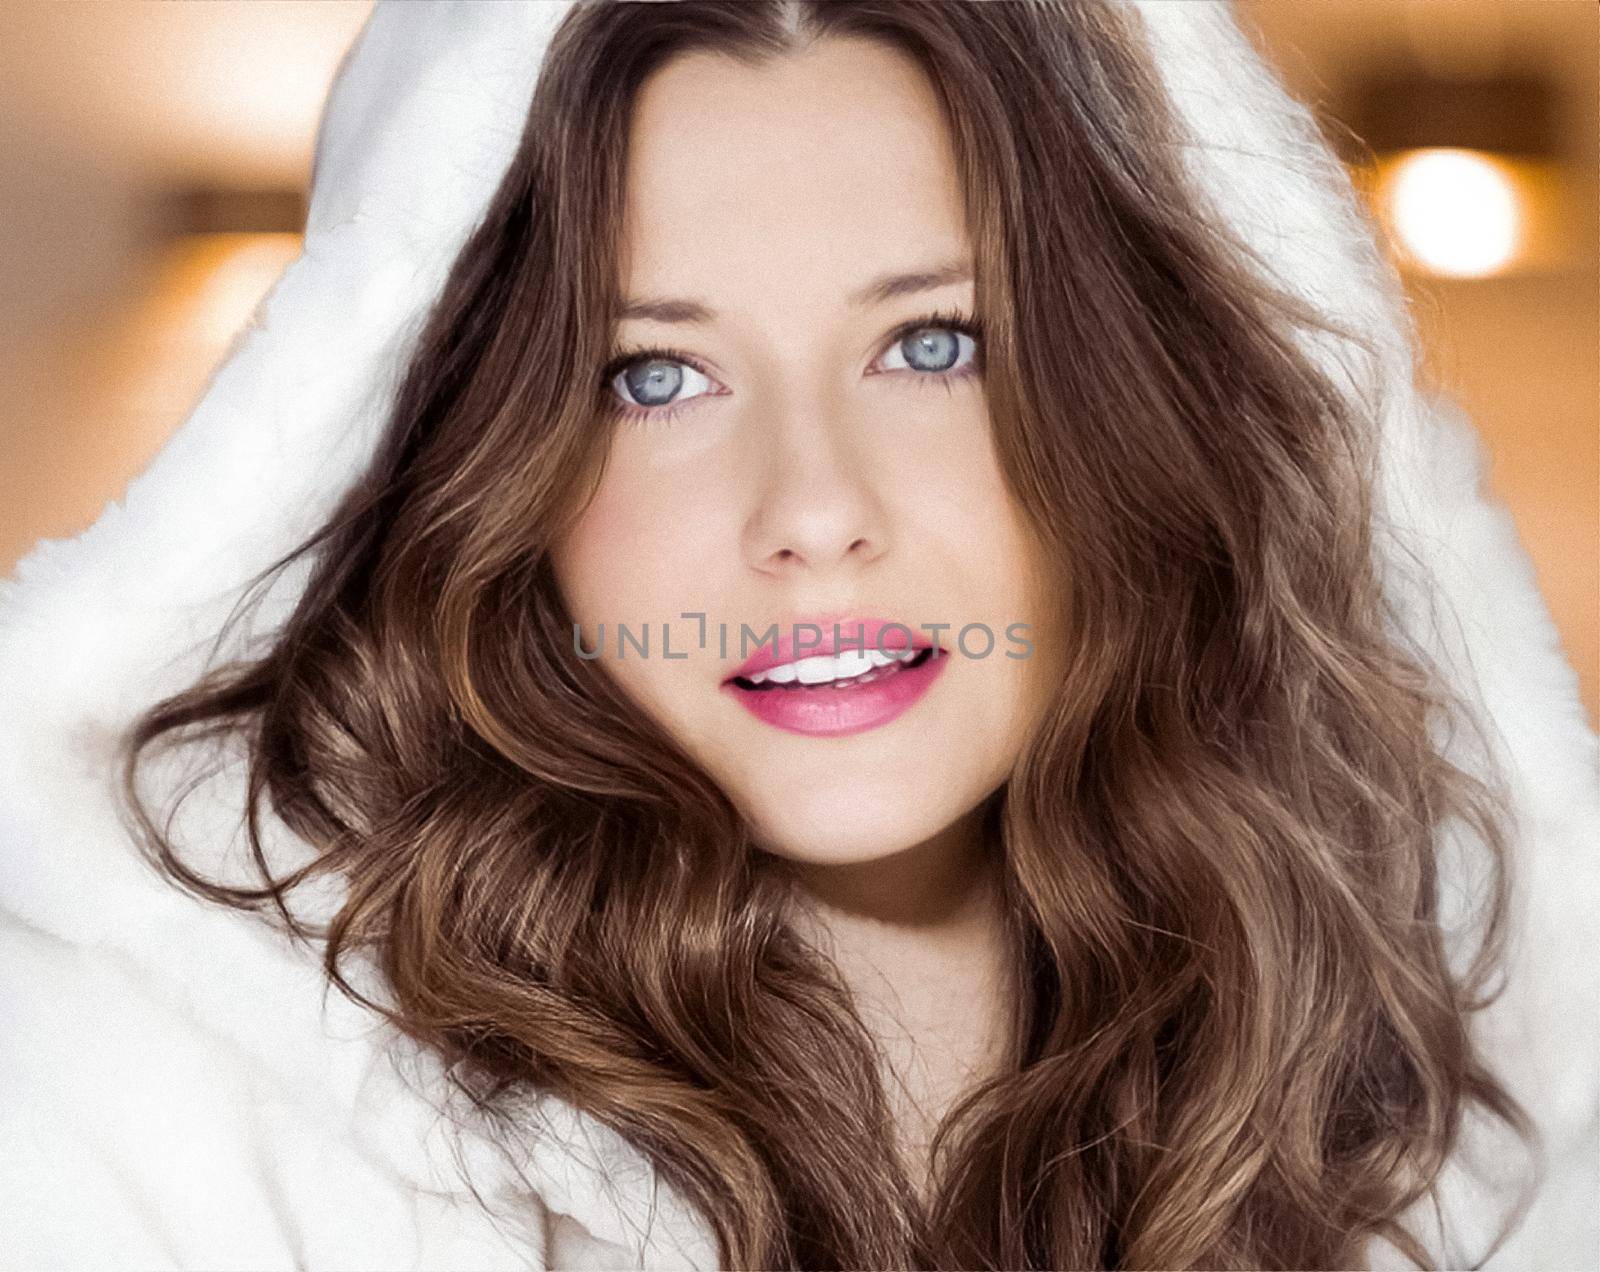 Winter fashion and Christmas holiday look. Beautiful woman wearing white sweater and fluffy fur coat with hood wrap, glamour makeup and hairstyle as xmas portrait.